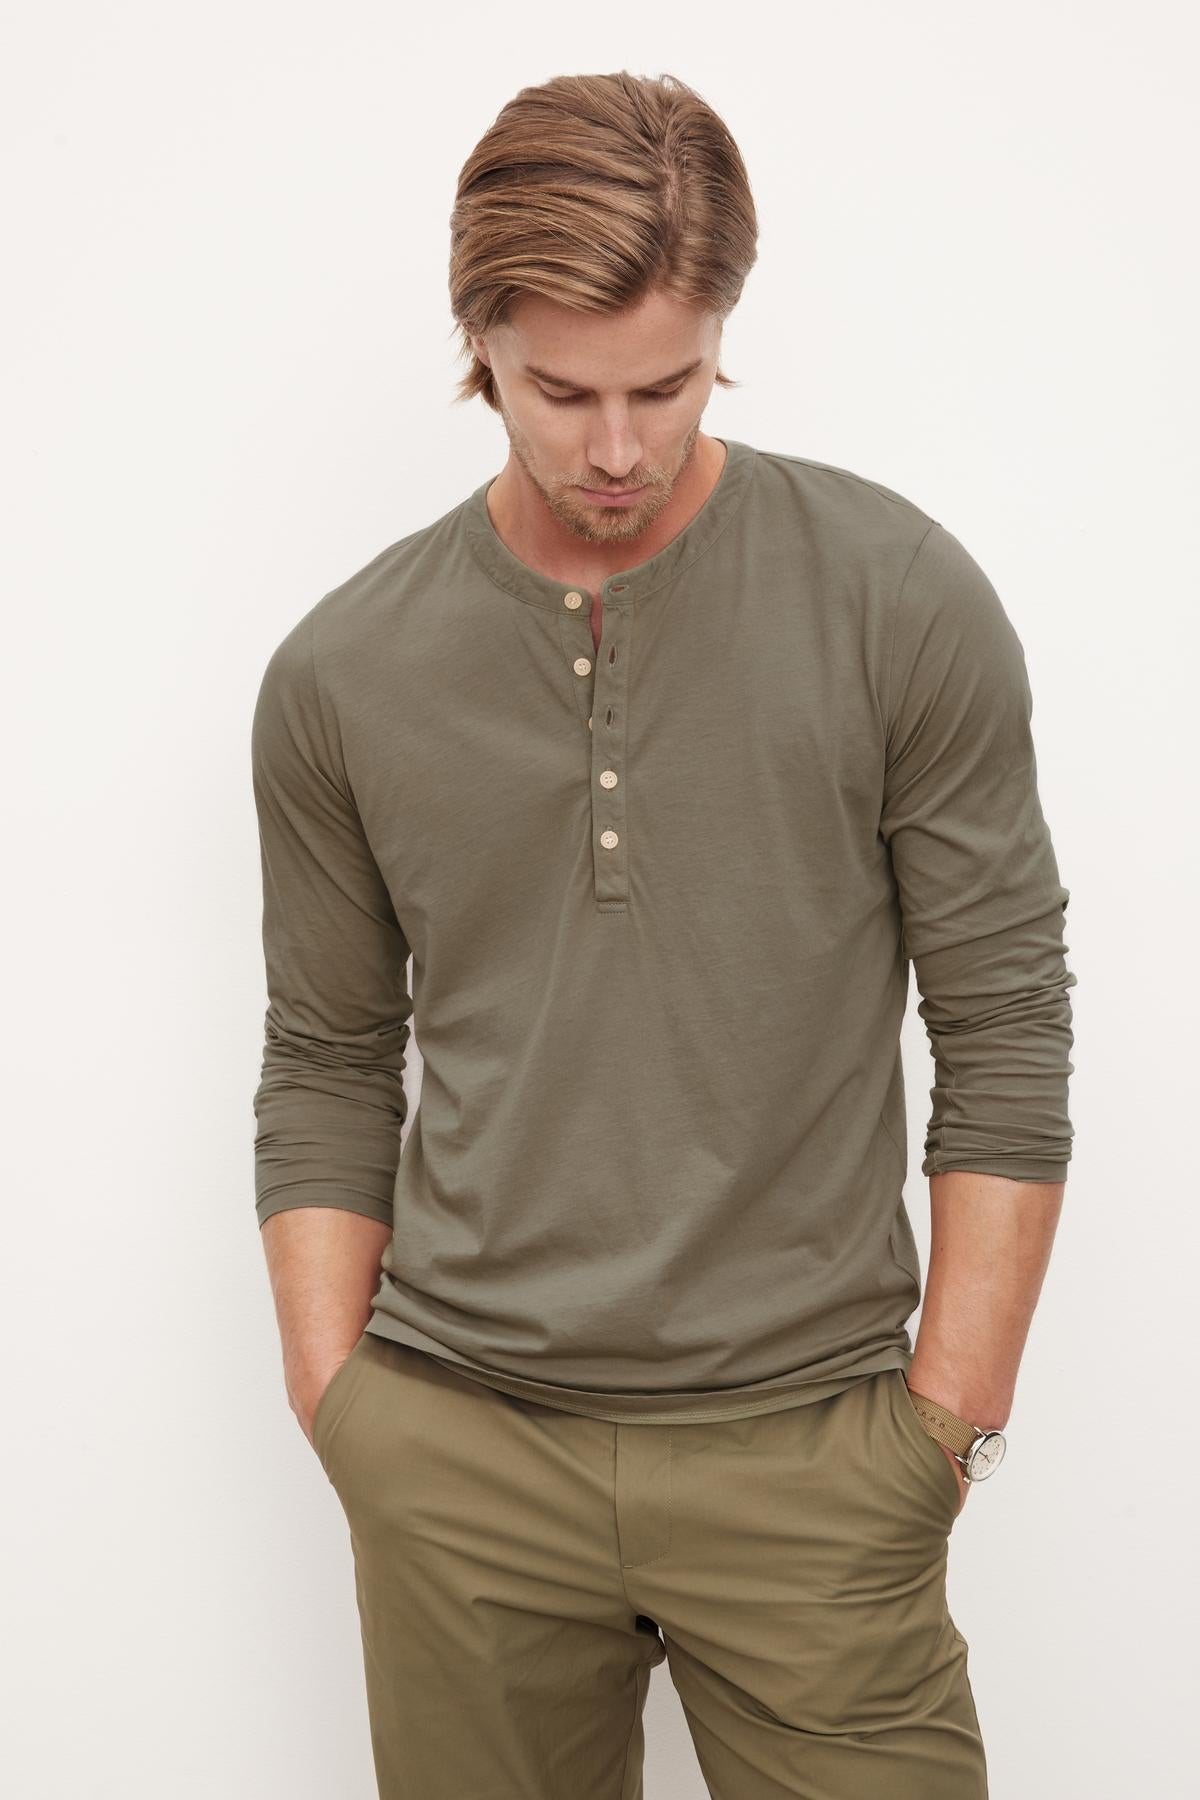   A man in a casual olive green Velvet by Graham & Spencer ALVARO COTTON JERSEY HENLEY shirt and matching pants with a vintage-look, looking down thoughtfully, with a wristwatch visible on his left arm. 